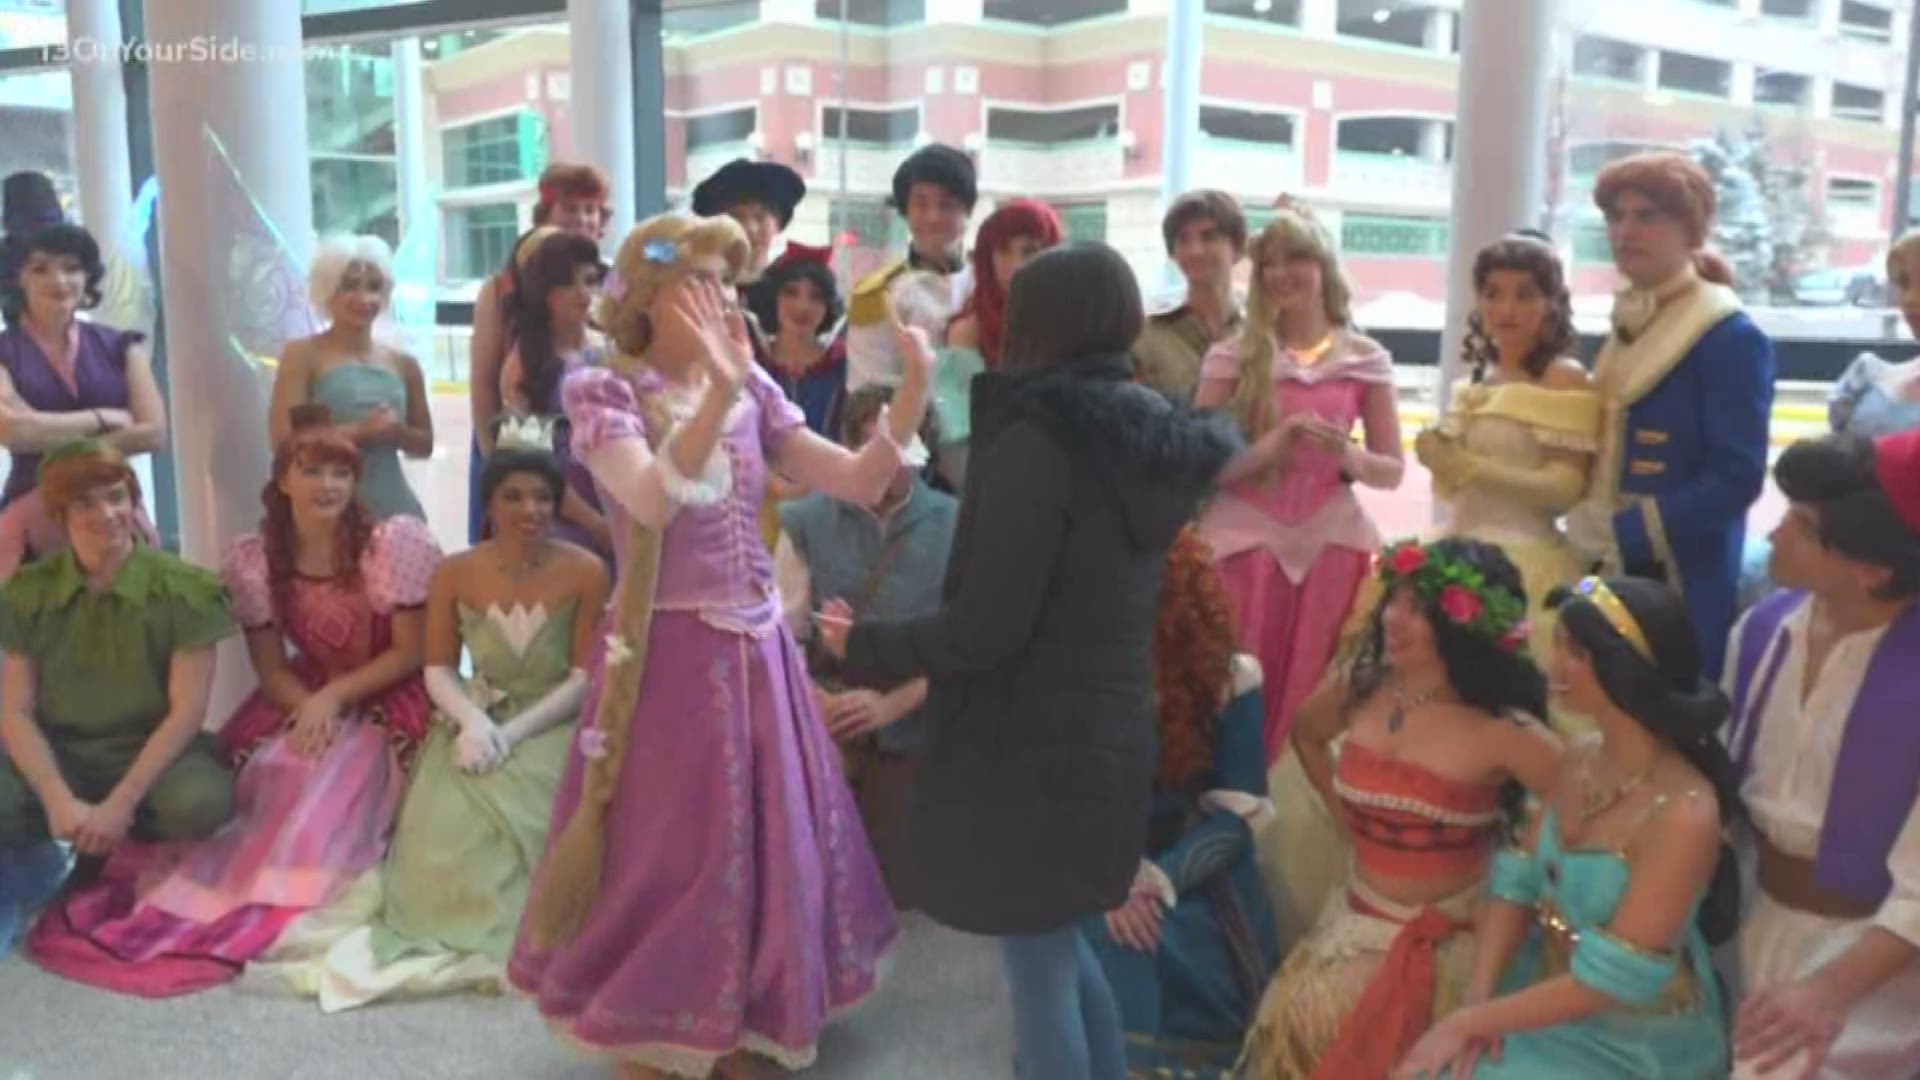 People attending the game could get photos and autographs with their favorite princess or prince.